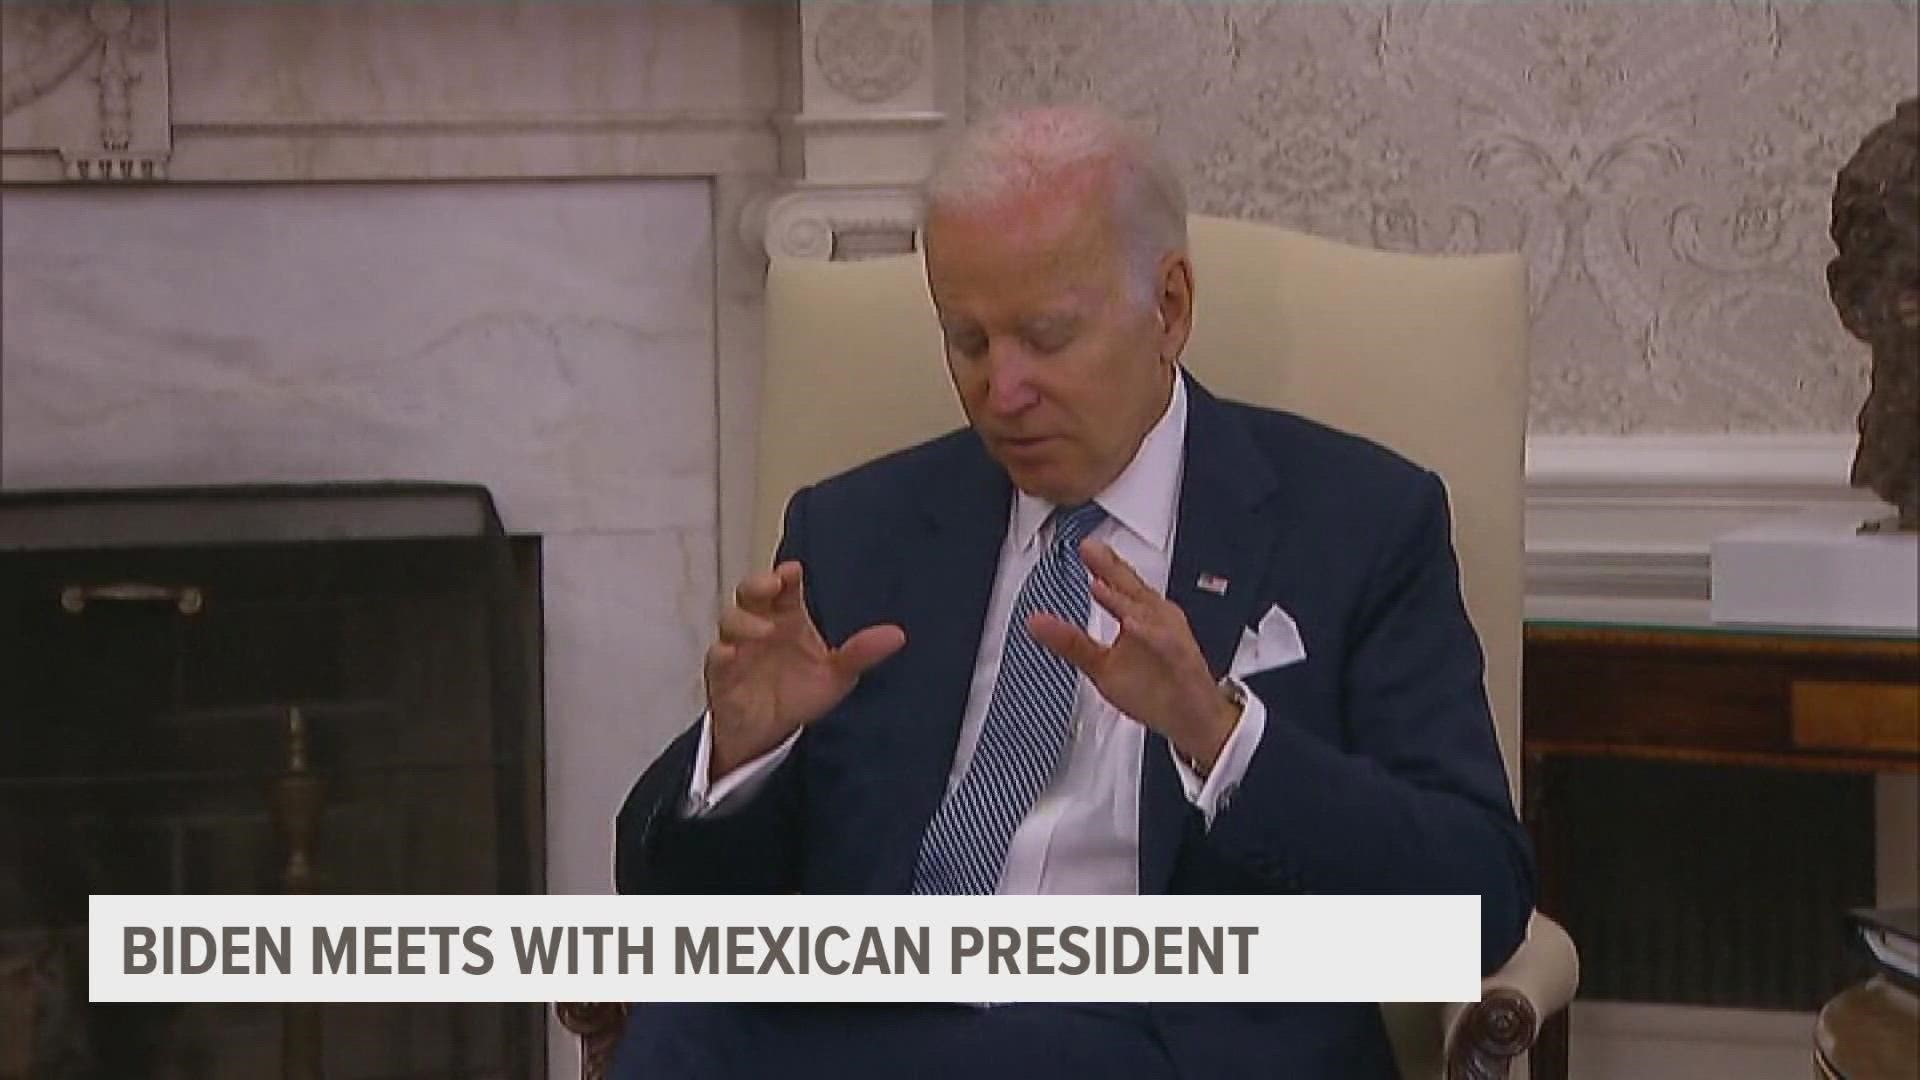 It will be the second in-person meeting between Biden and López Obrador at the White House.